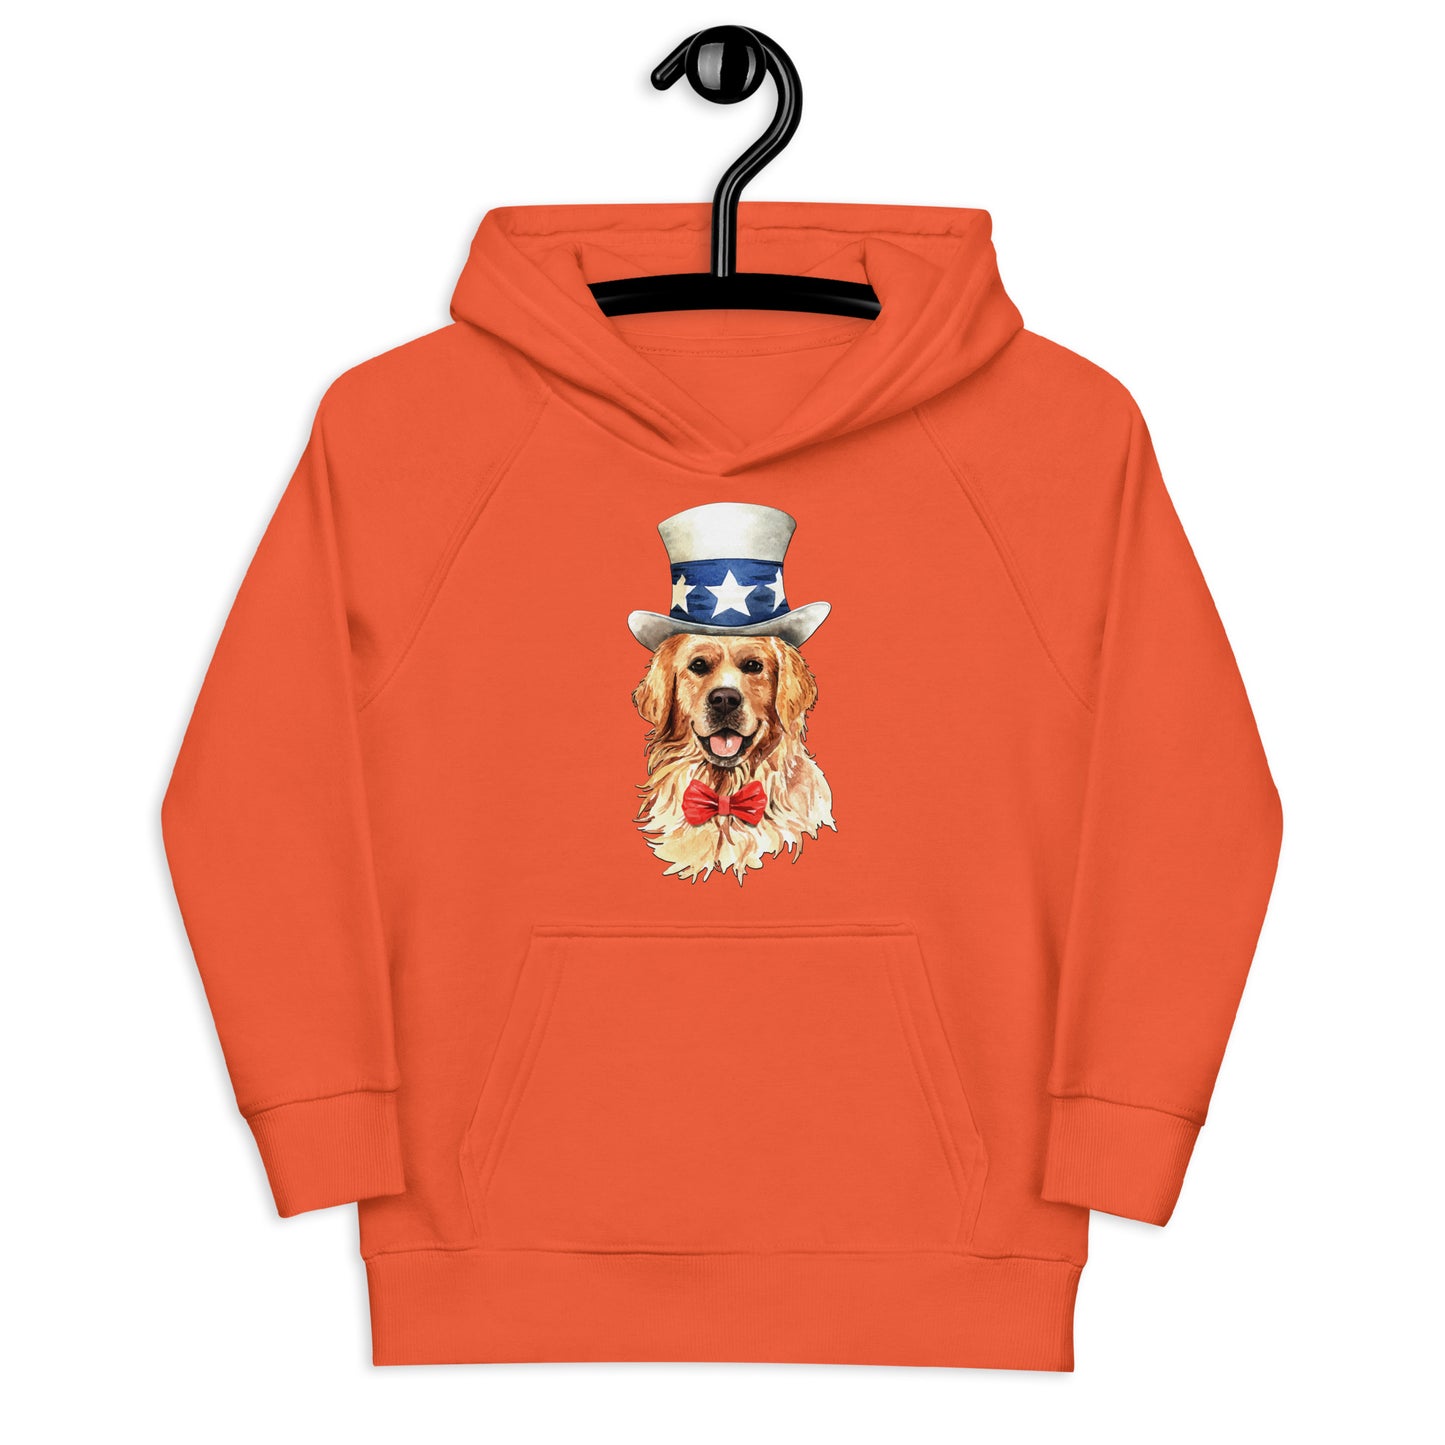 Cool Golden Retriever Dog with Hat Hoodie, No. 0580